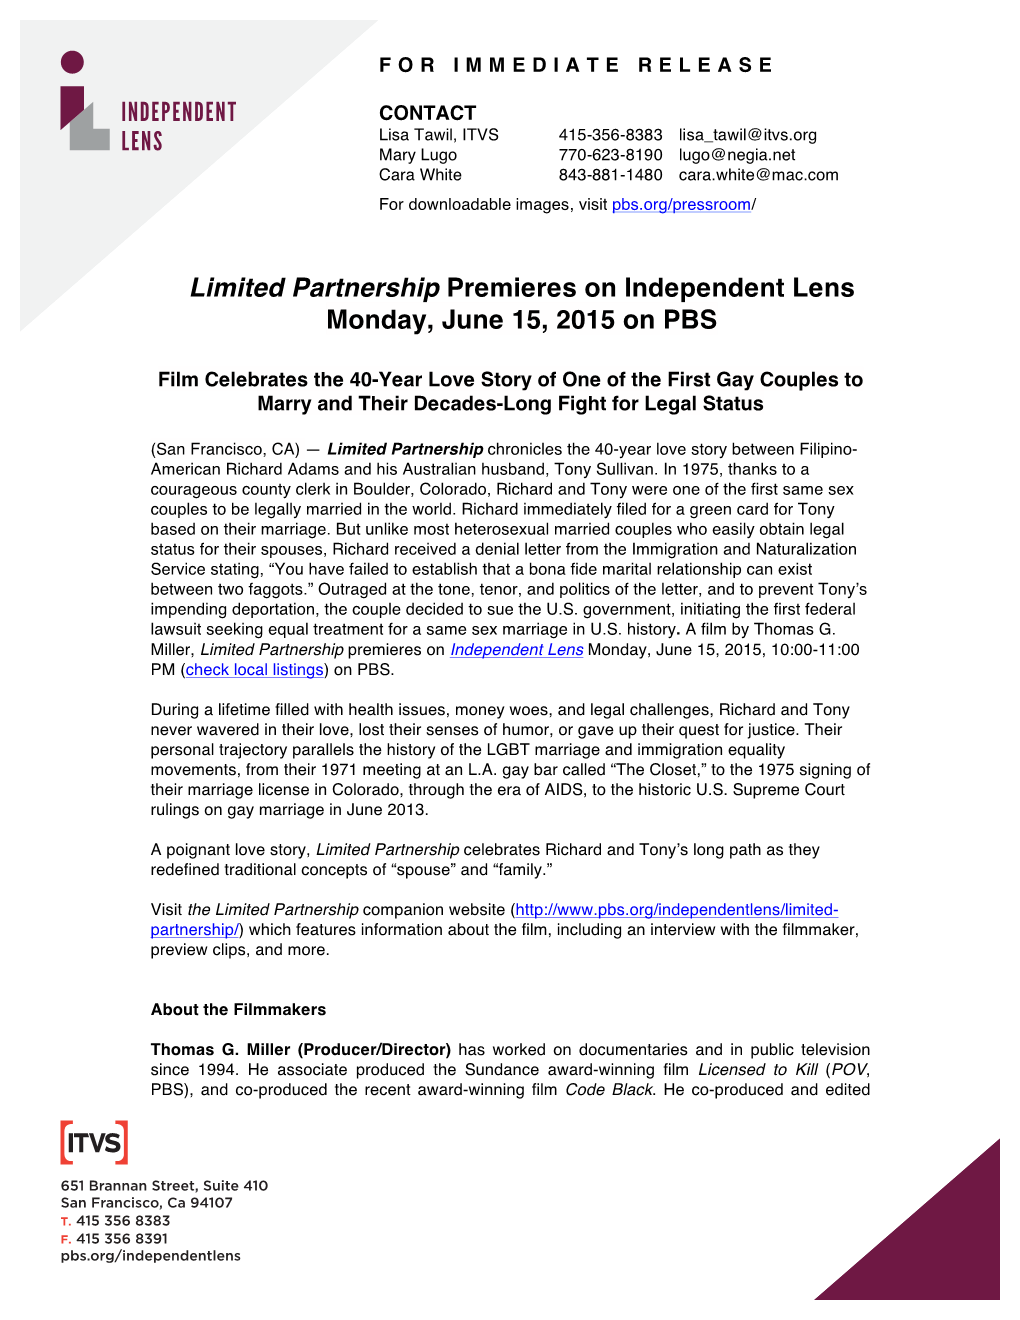 Limited Partnership Premieres on Independent Lens Monday, June 15, 2015 on PBS